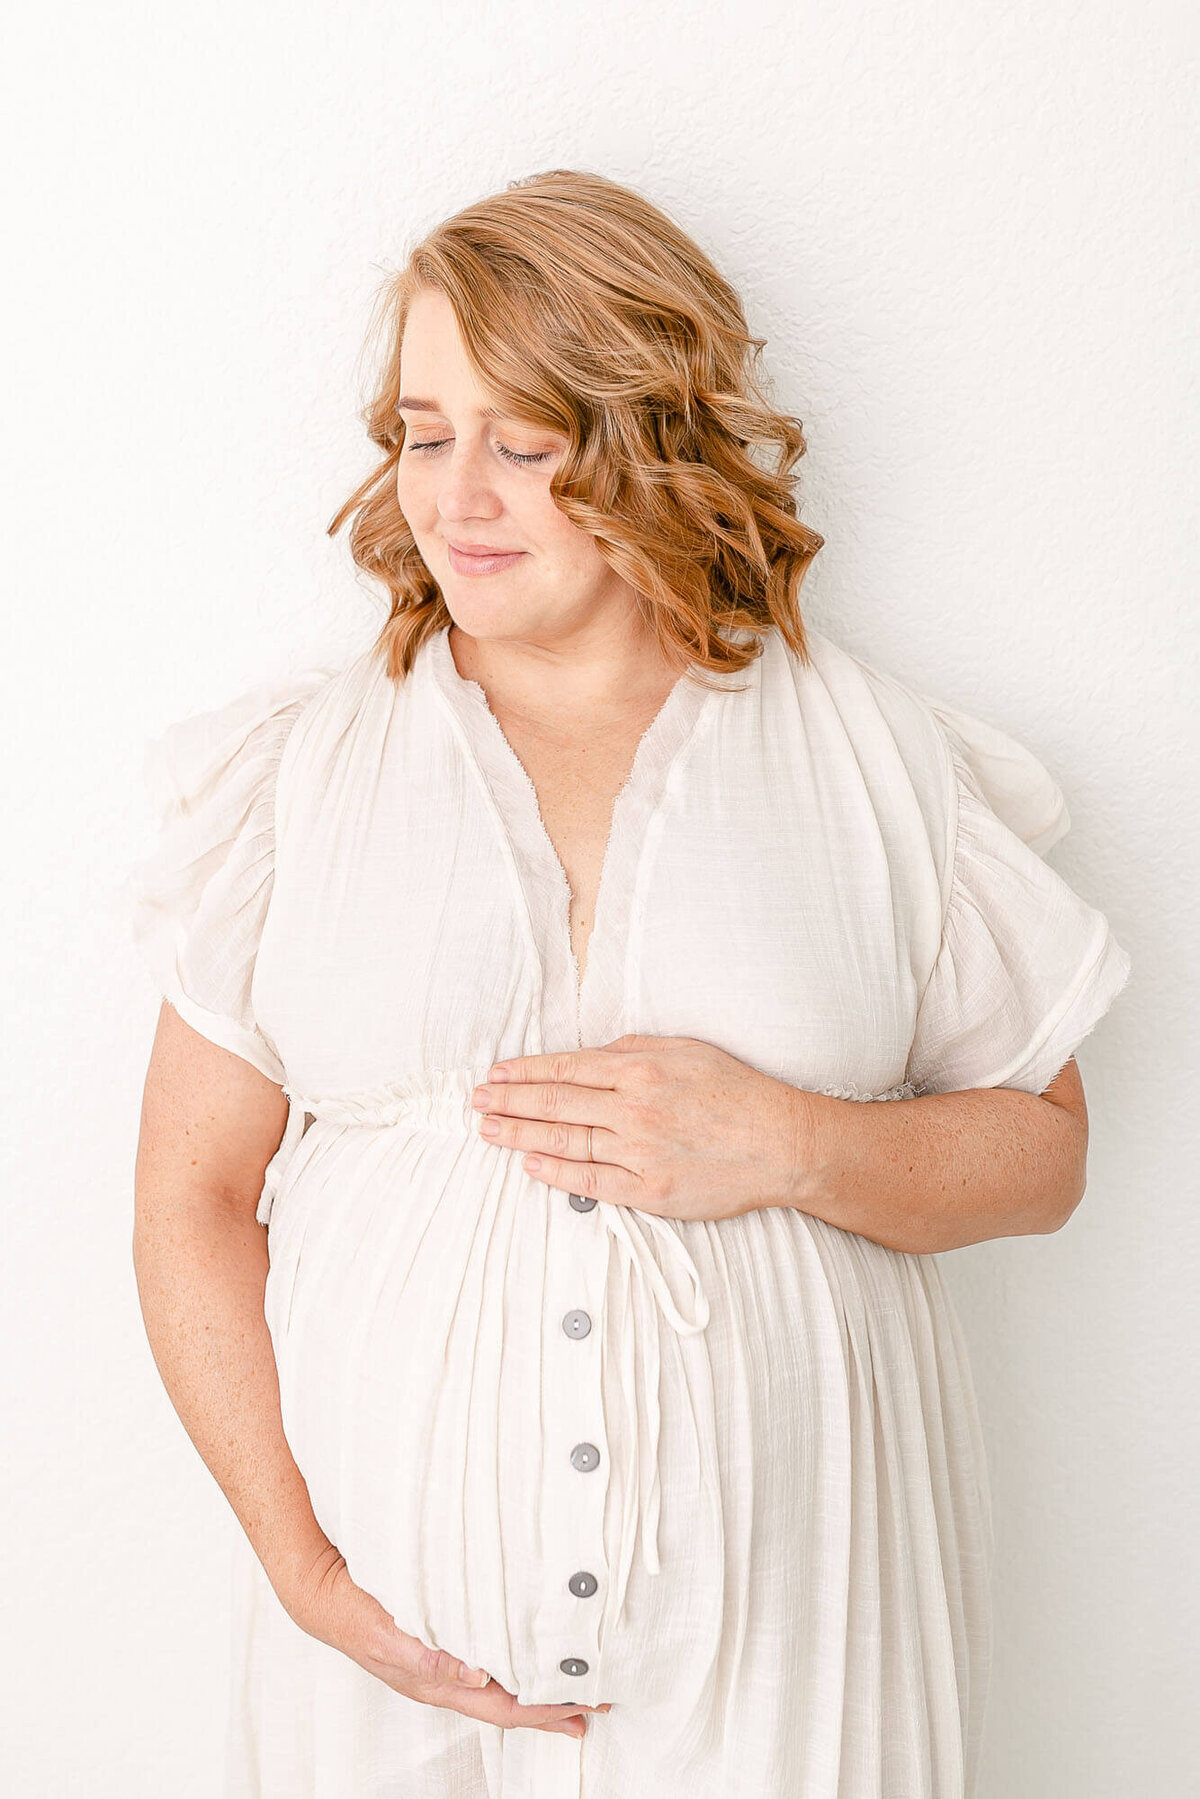 Woman with a baby bump standing in an all-white photography studio. She is wearing a long cream colored dress. She is looking down and has a soft smile on her face.